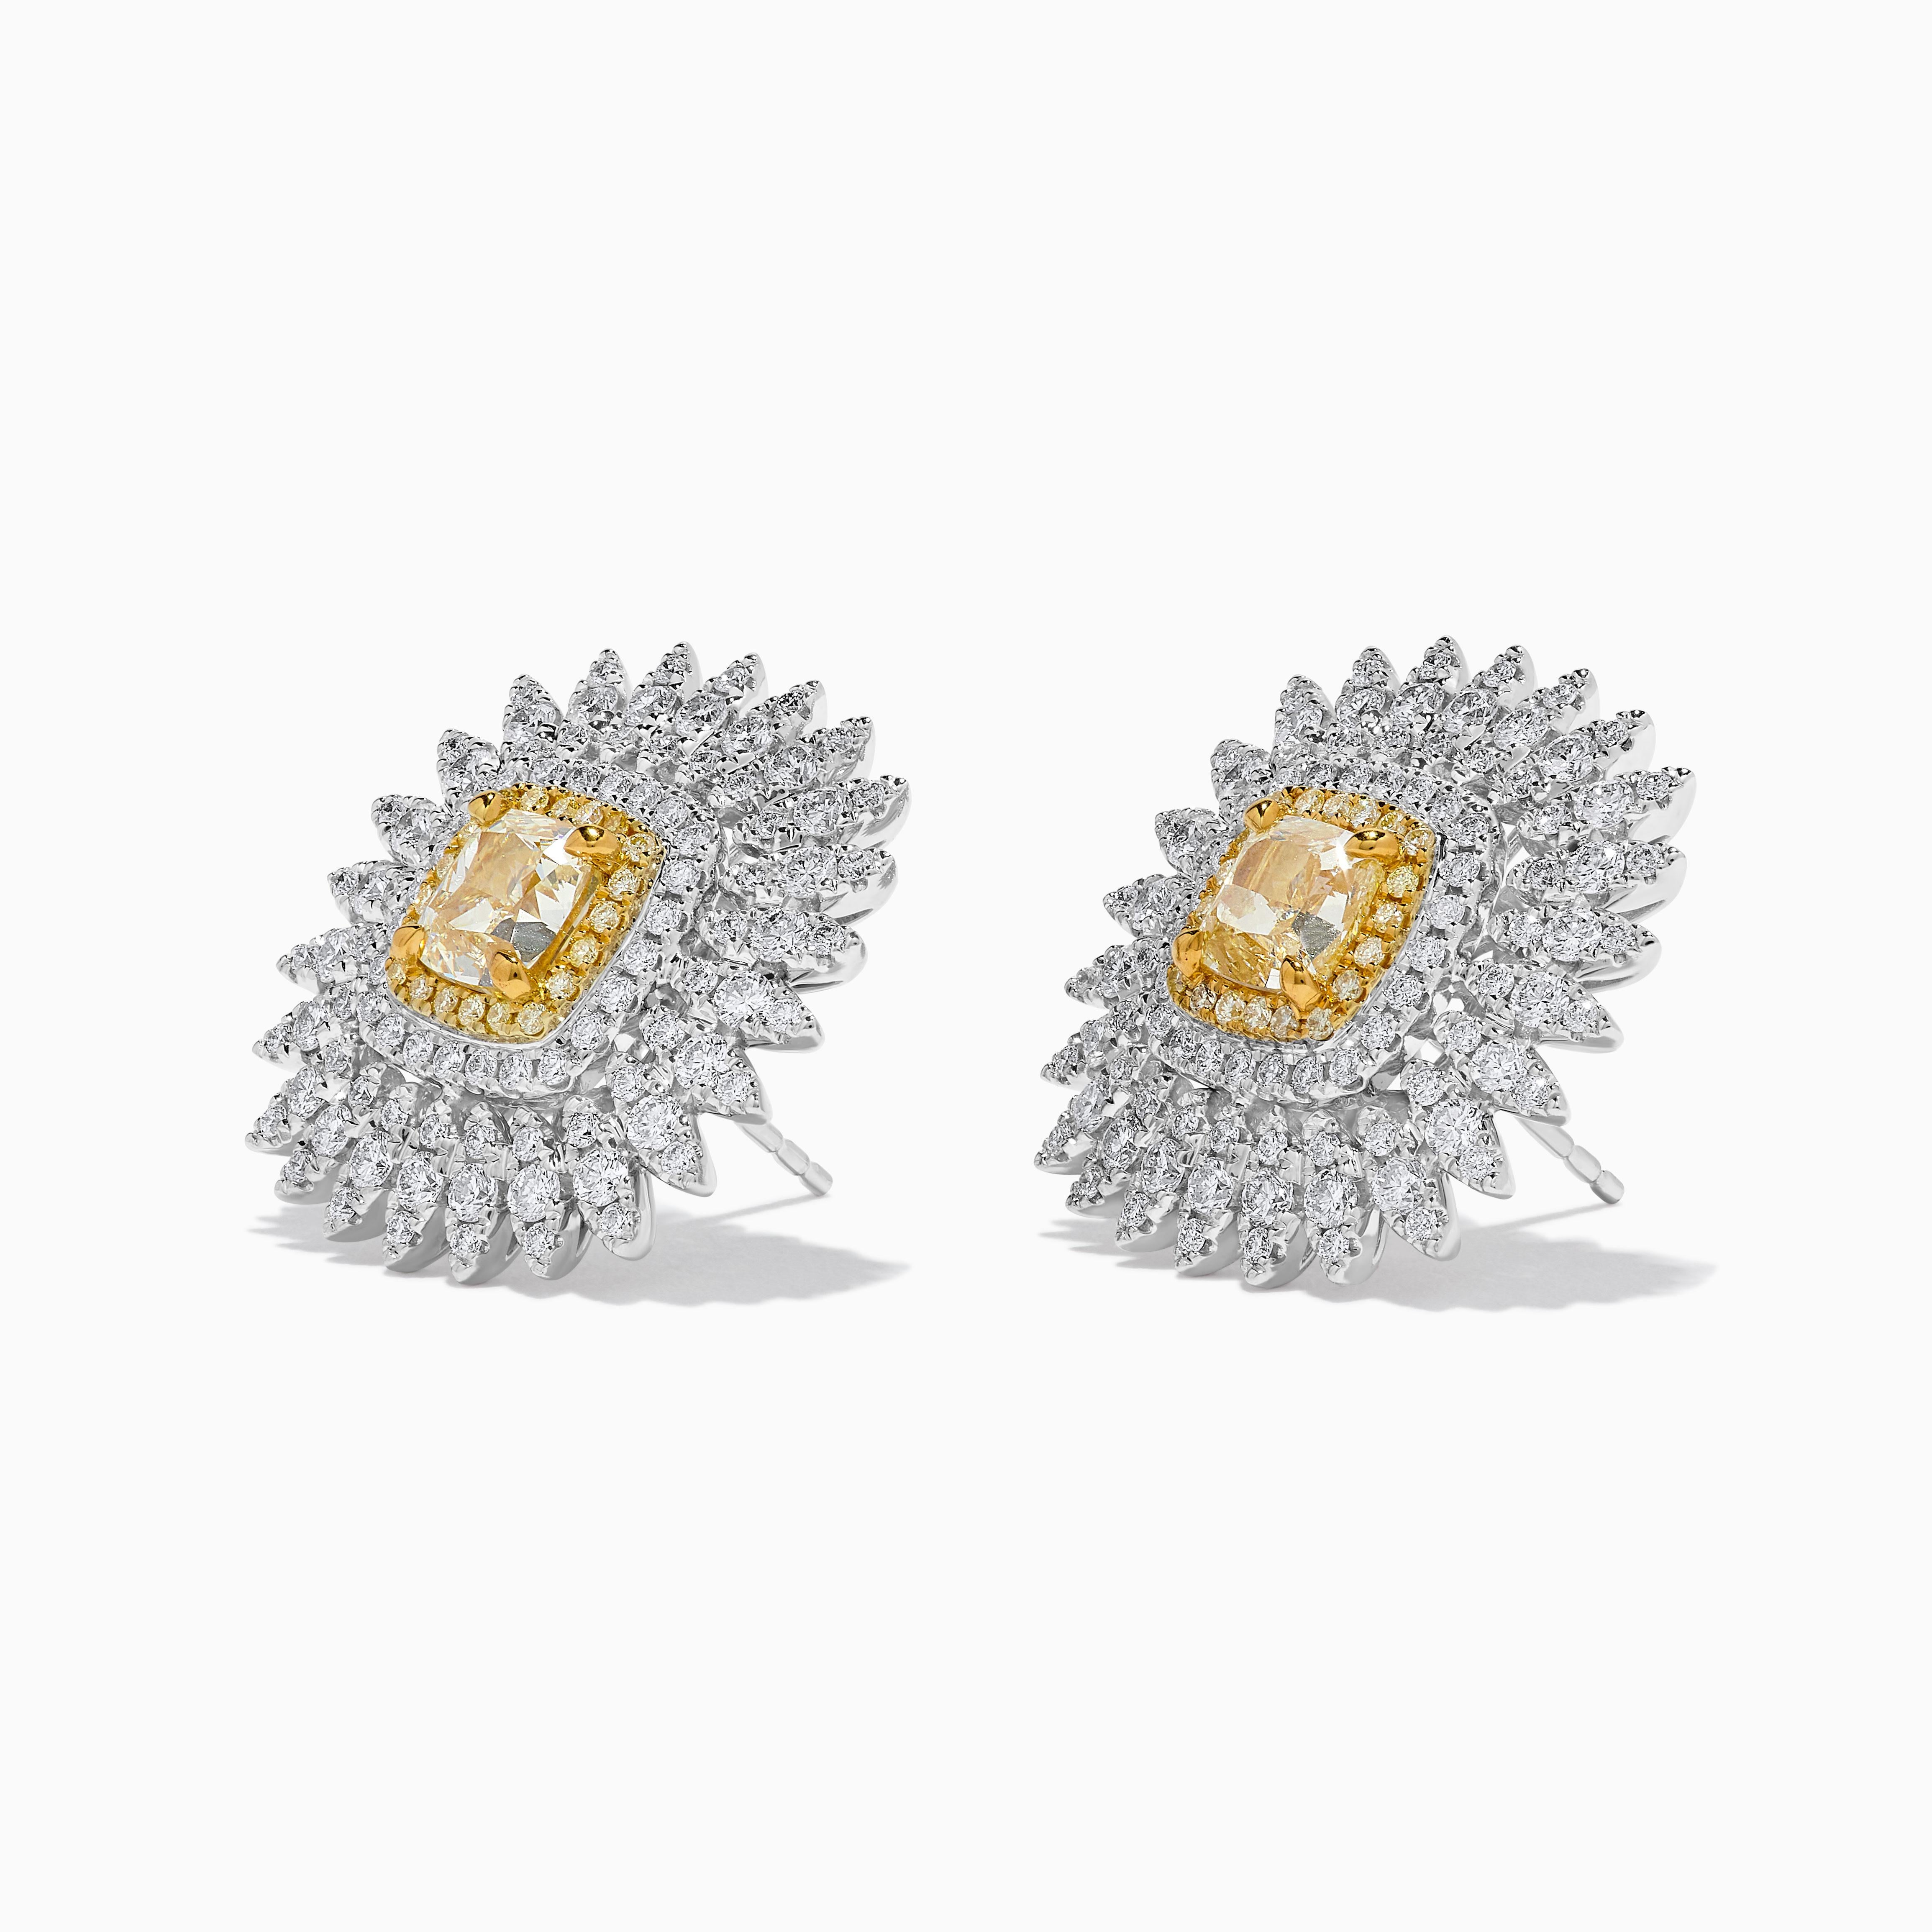 Contemporary Natural Yellow Cushion Diamond 3.95 Carat TW Gold Stud Earrings For Sale